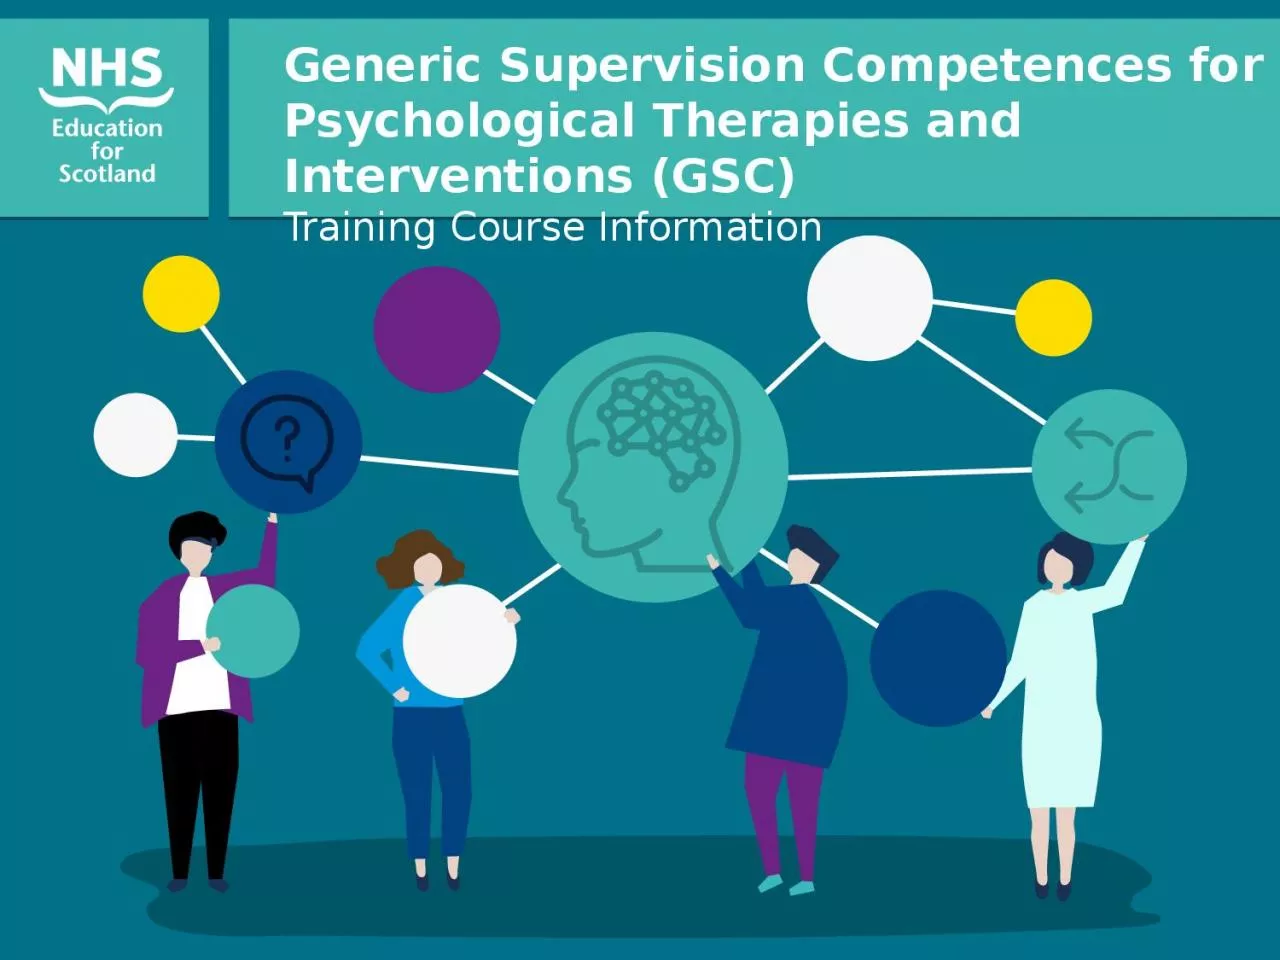 Generic Supervision Competences for Psychological Therapies and Interventions (GSC)